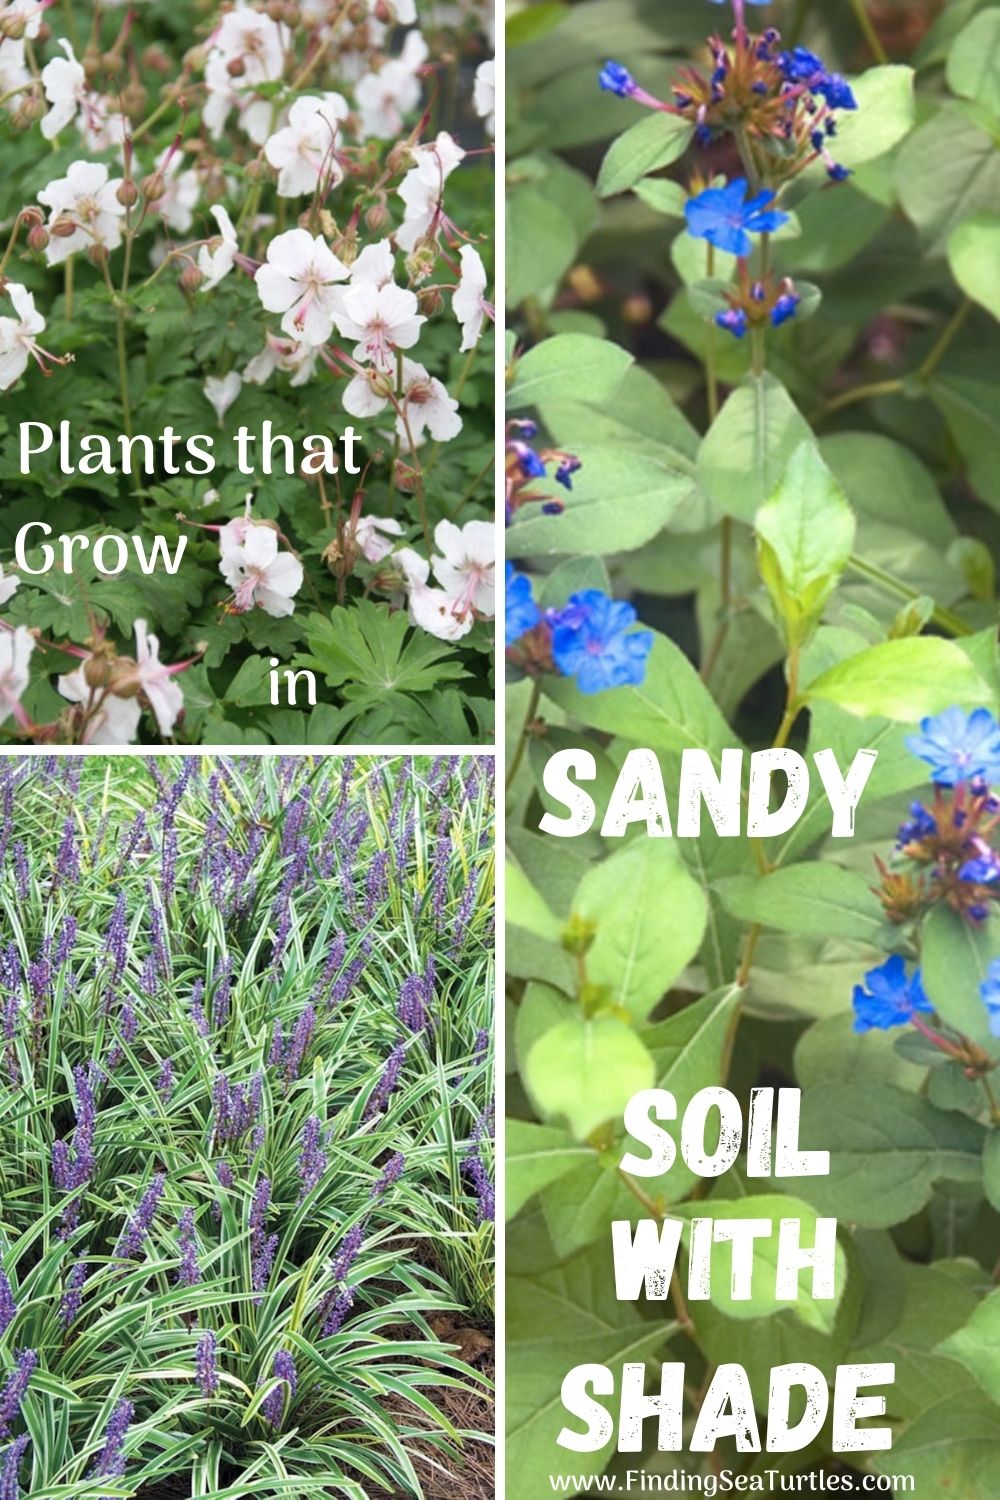 Plants that Grow in Sandy Soil and Shade